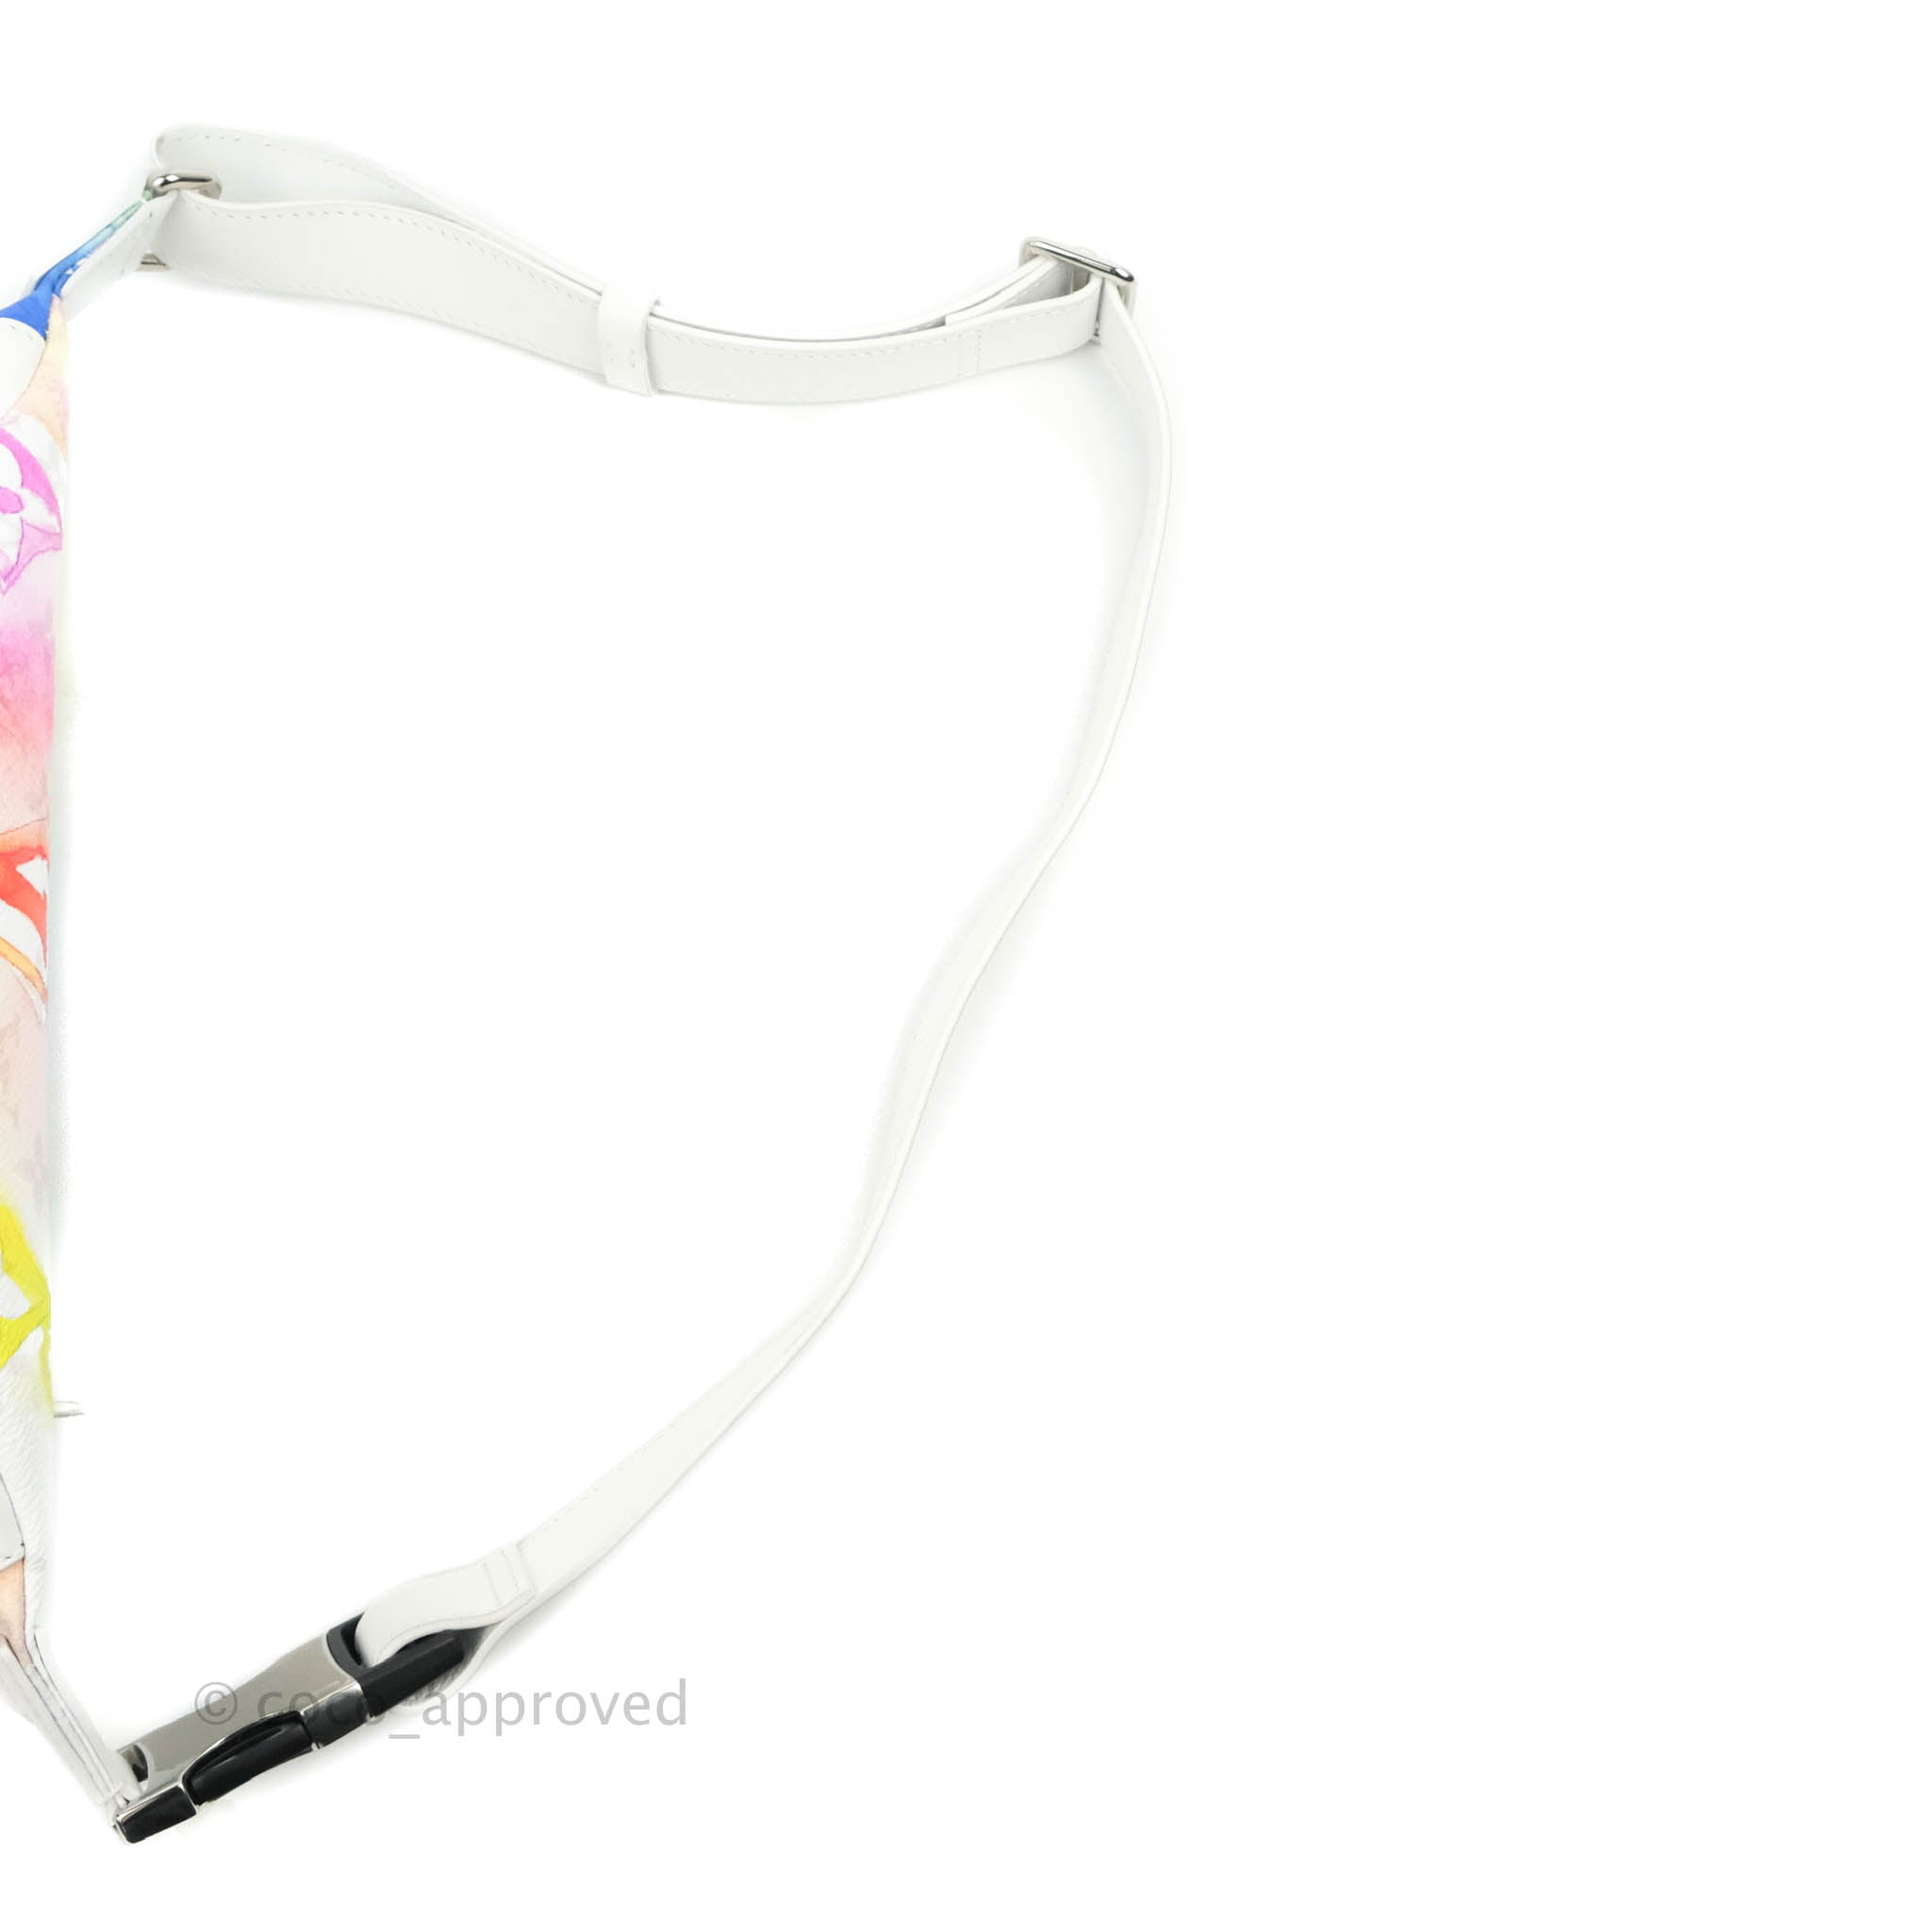 Louis Vuitton Monogram Watercolor Discovery Bumbag Multicolor – Coco  Approved Studio